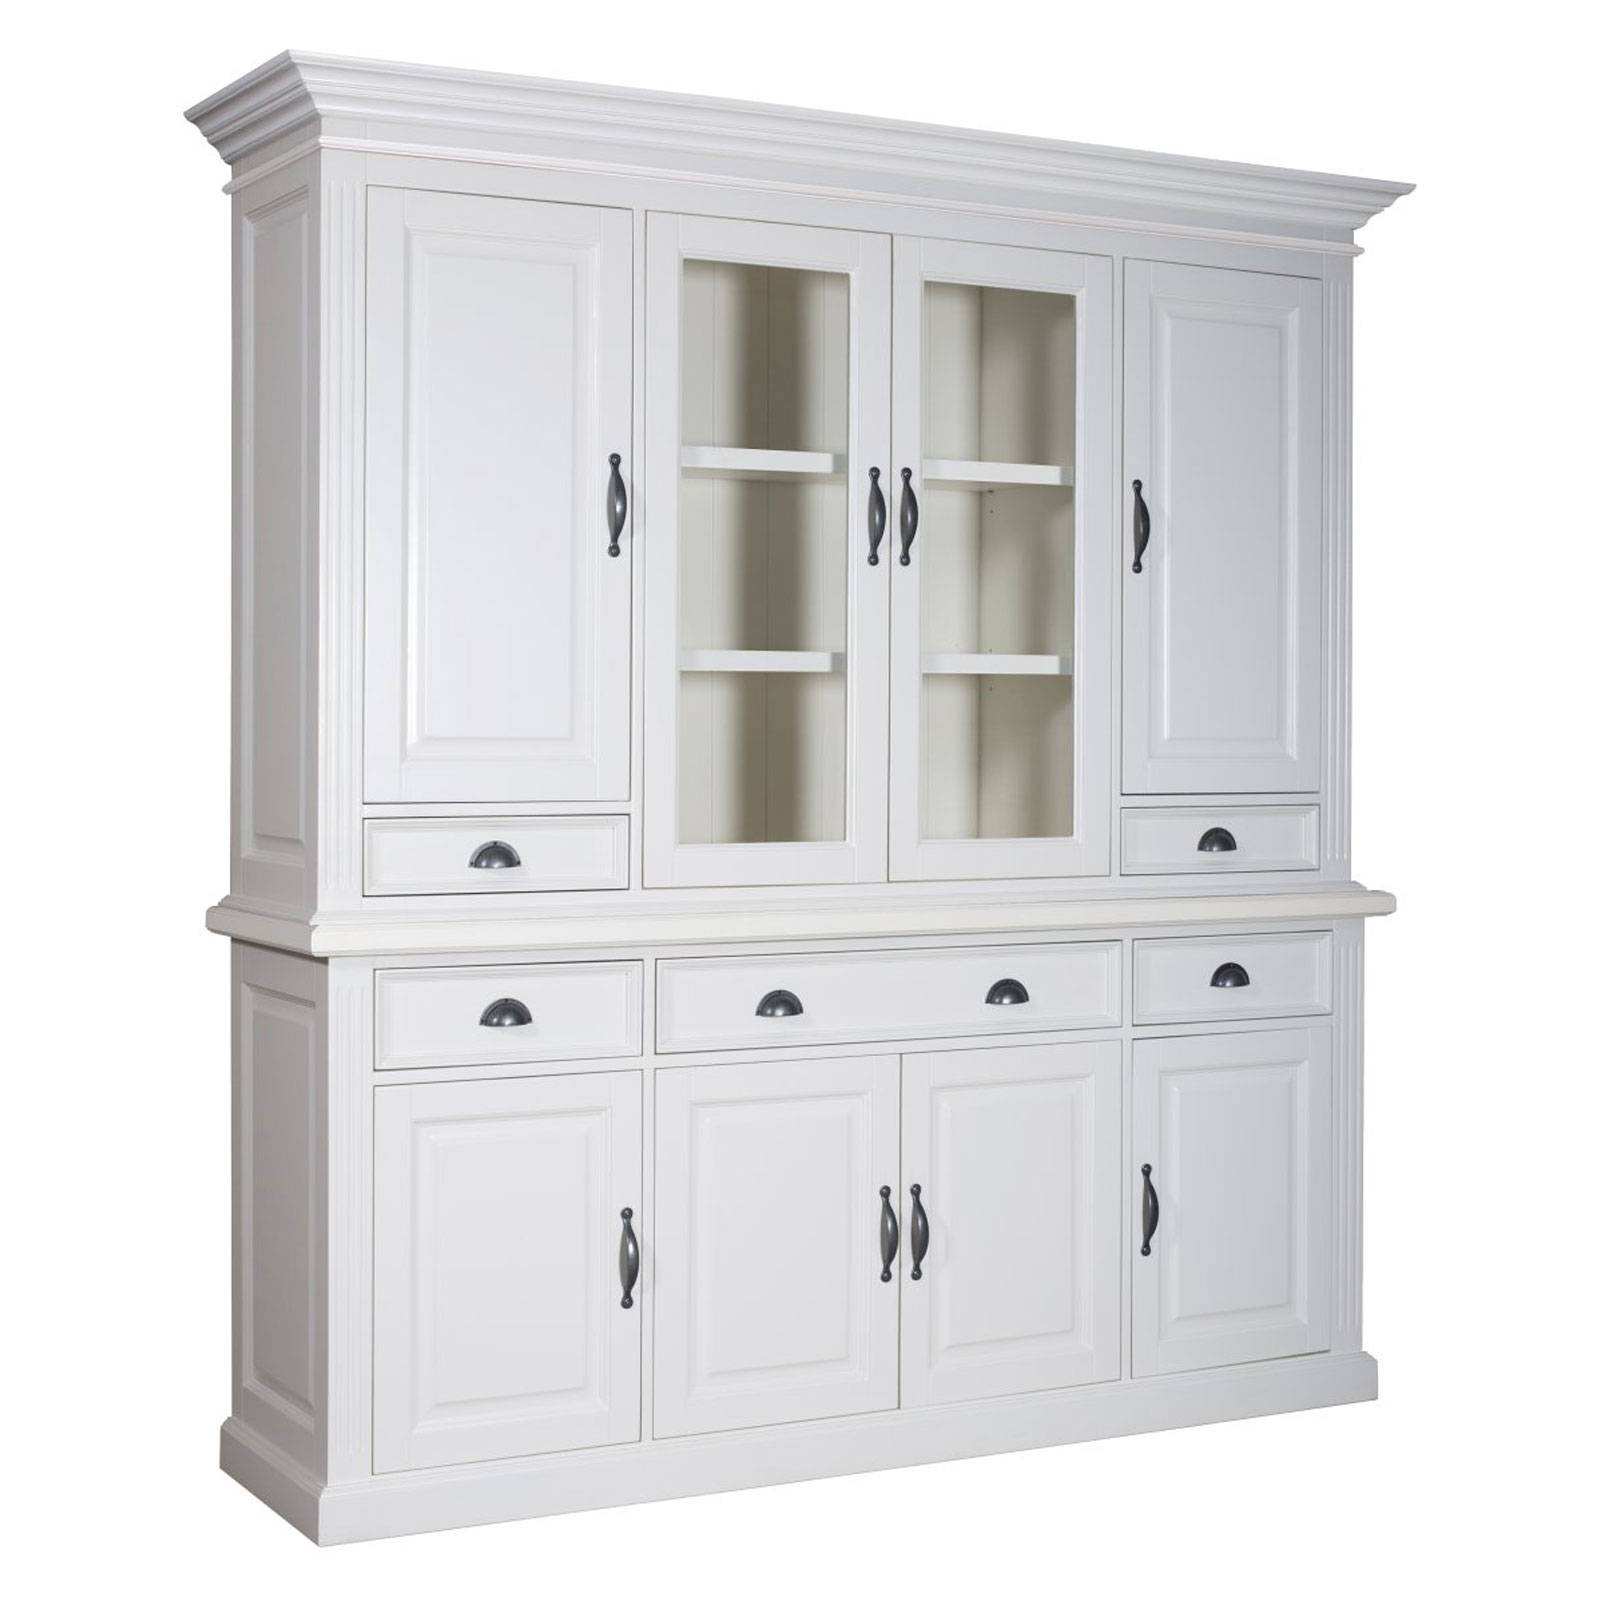 Cabinet 2x4 portes 5 tiroirs - achat mobilier chic